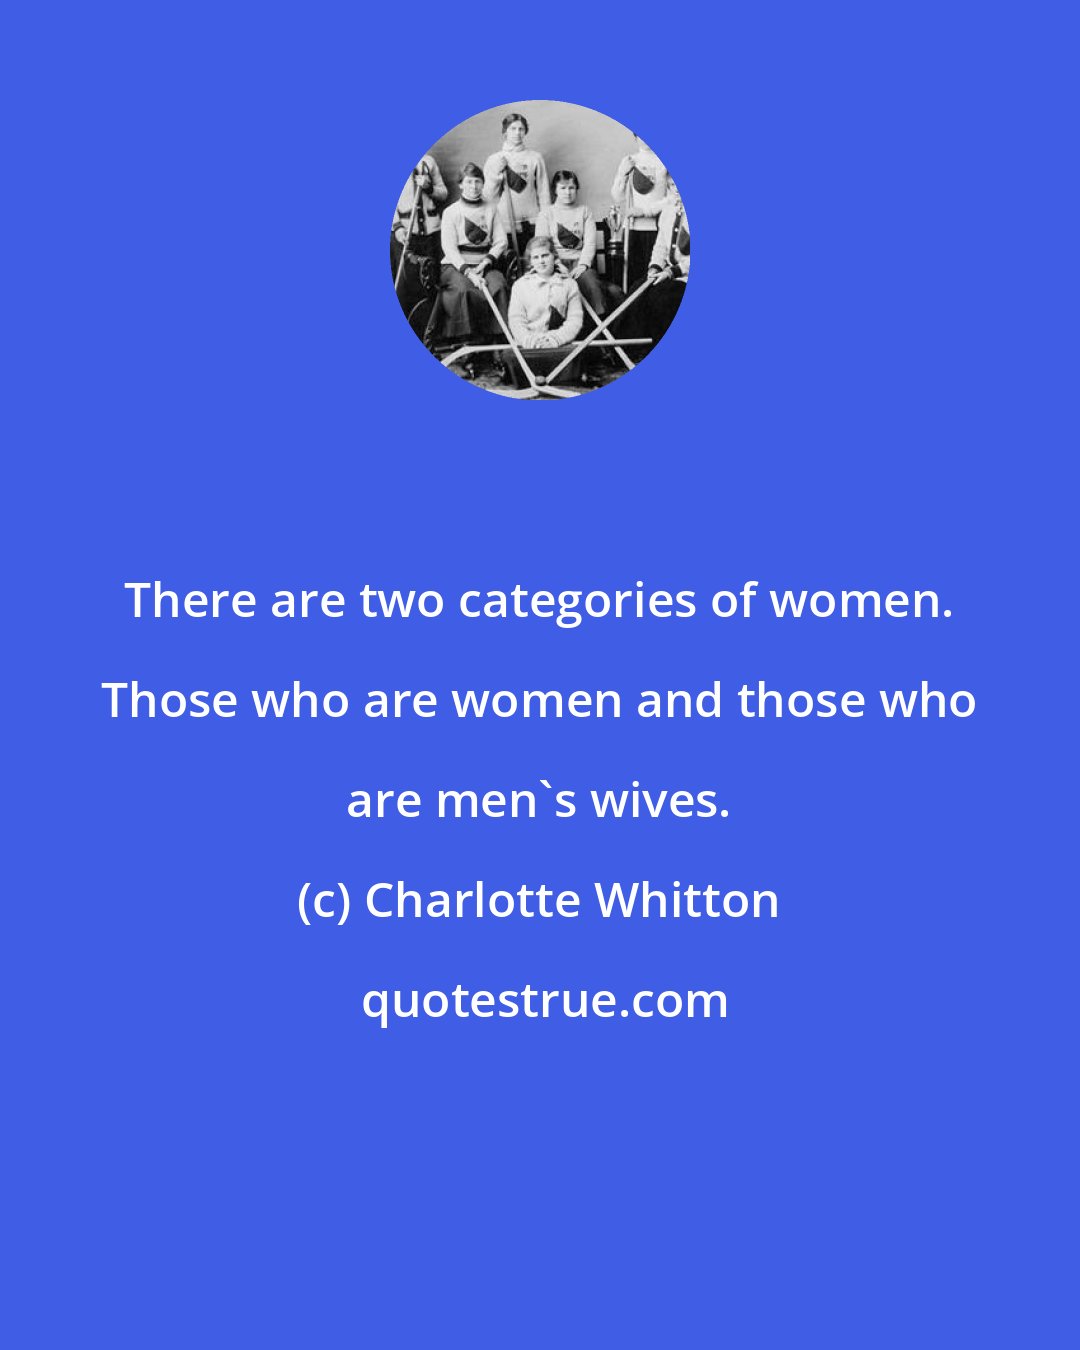 Charlotte Whitton: There are two categories of women. Those who are women and those who are men's wives.